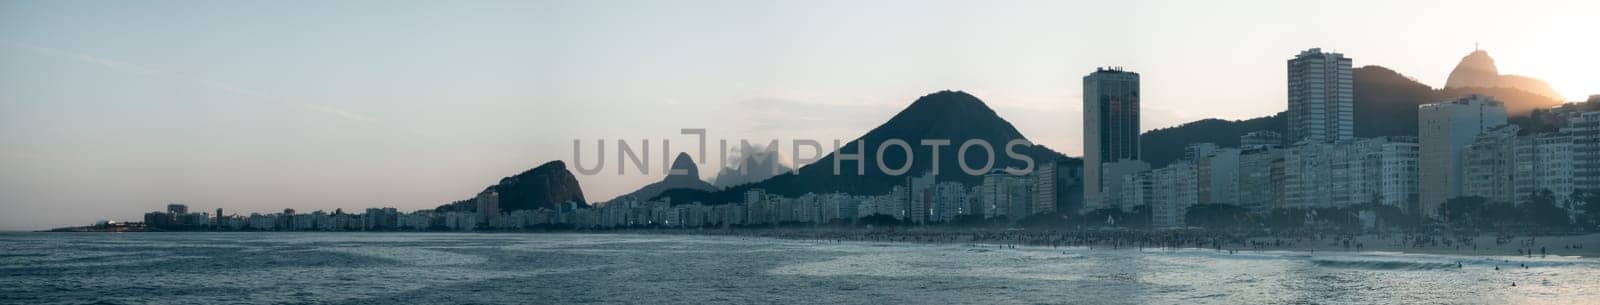 Tranquil view of Rio de Janeiro's skyline featuring Sugarloaf Mountain at sunset.